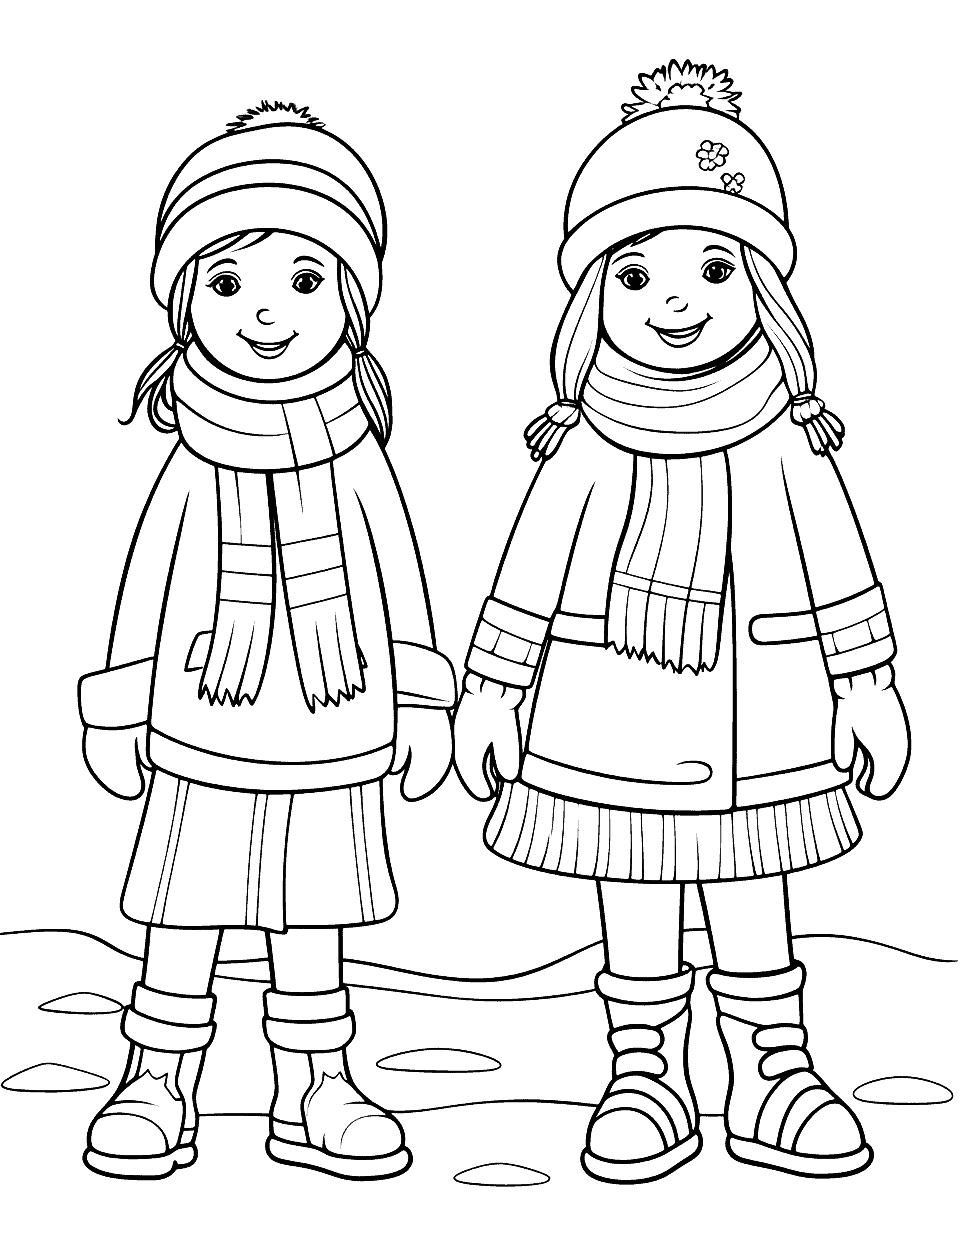 Winter Fashion Coloring Page - Various winter clothes, from coats to boots, ideal for fashion-loving kids.